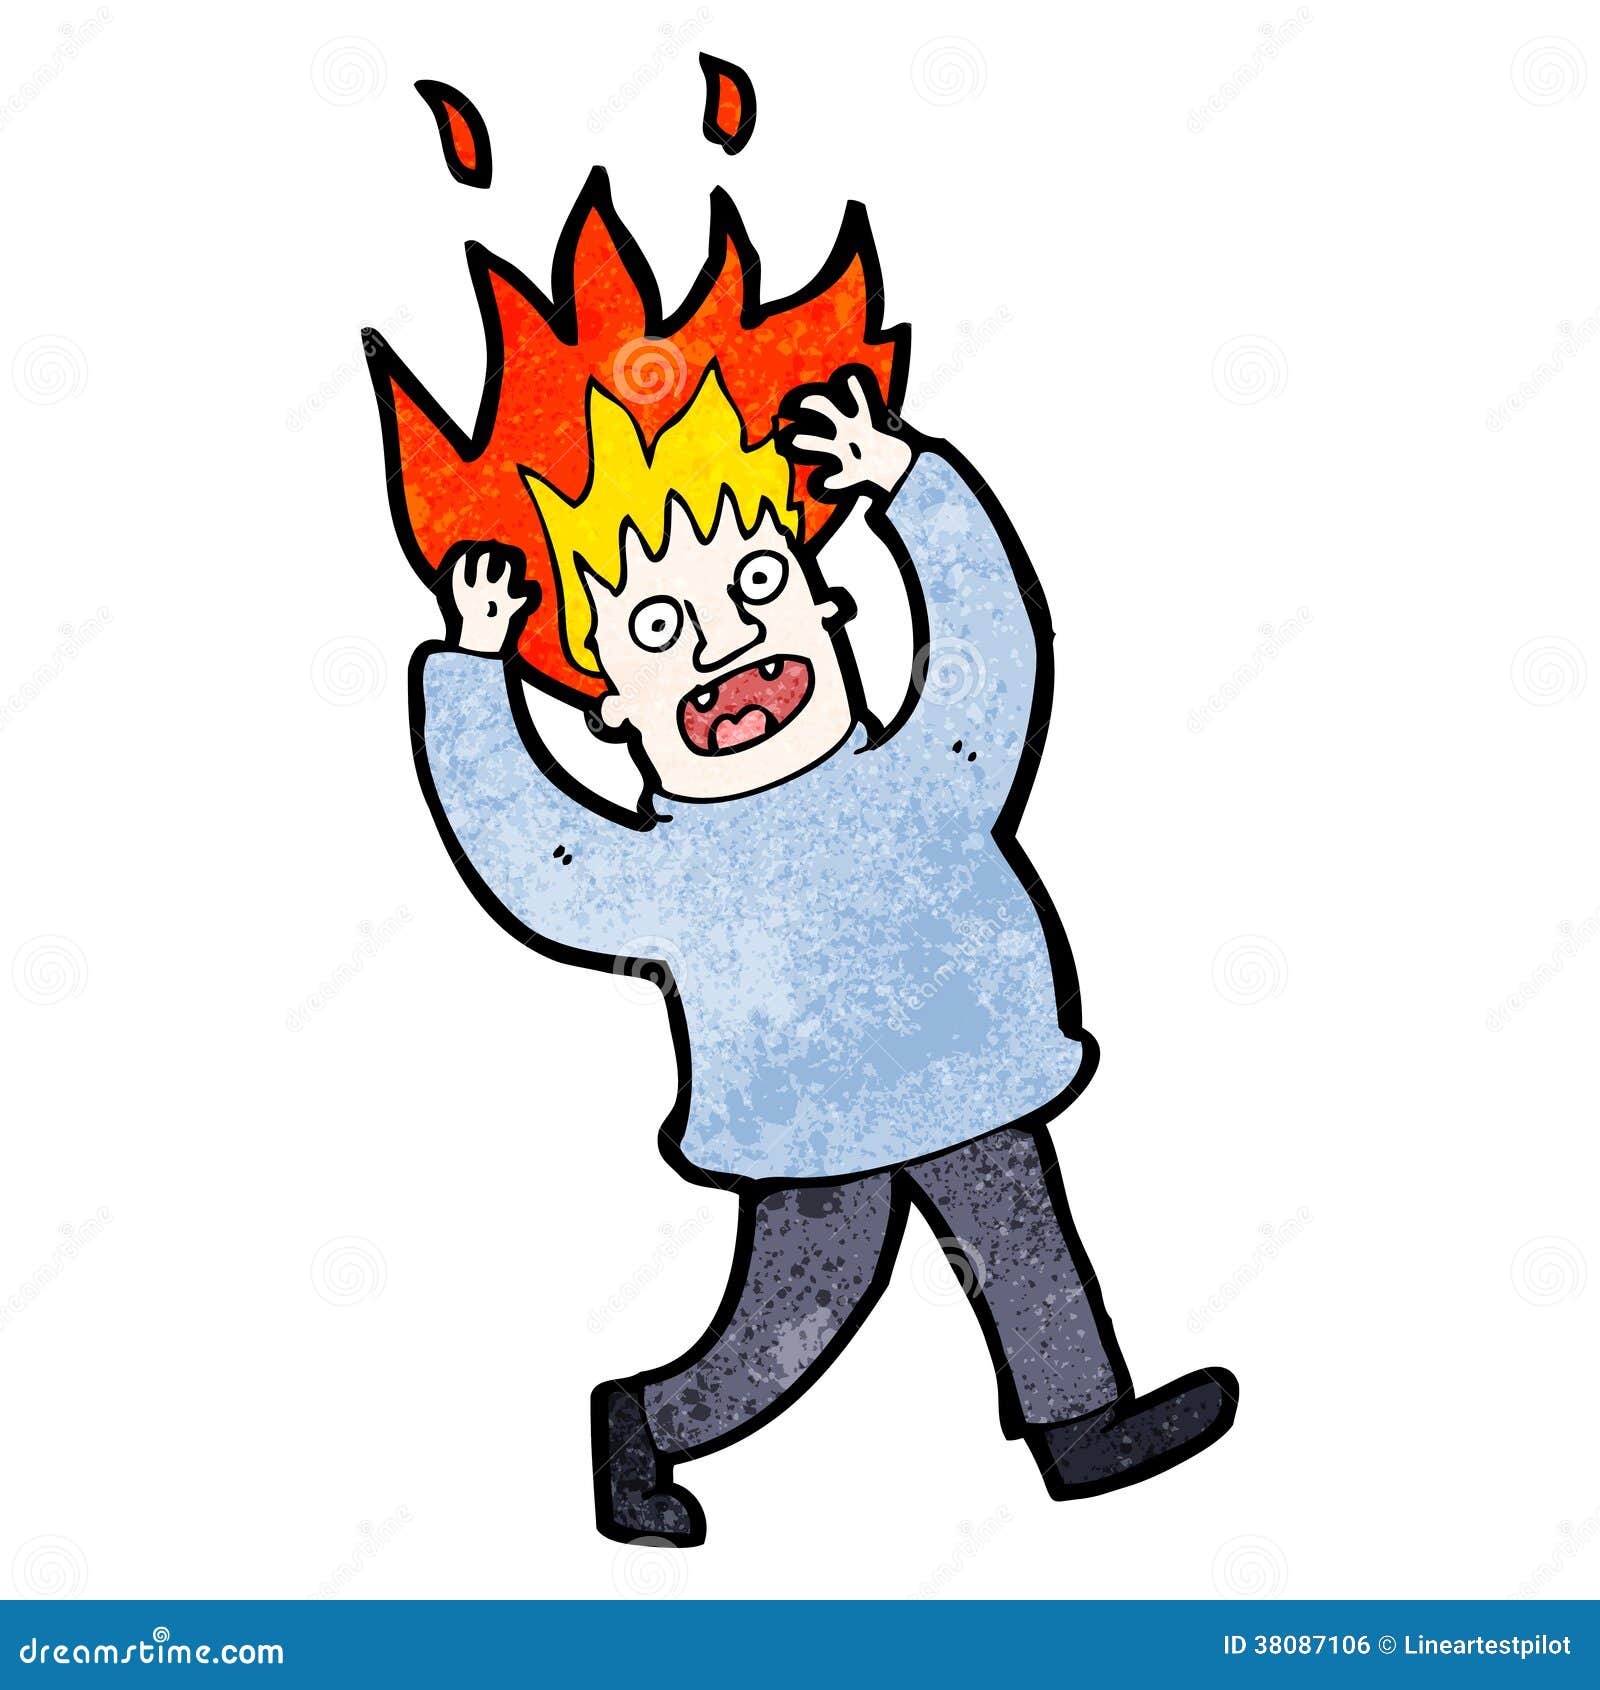 Featured image of post Cartoon Character With Flames For Hair : Fashion haircut, hairdo trendy design illustration.